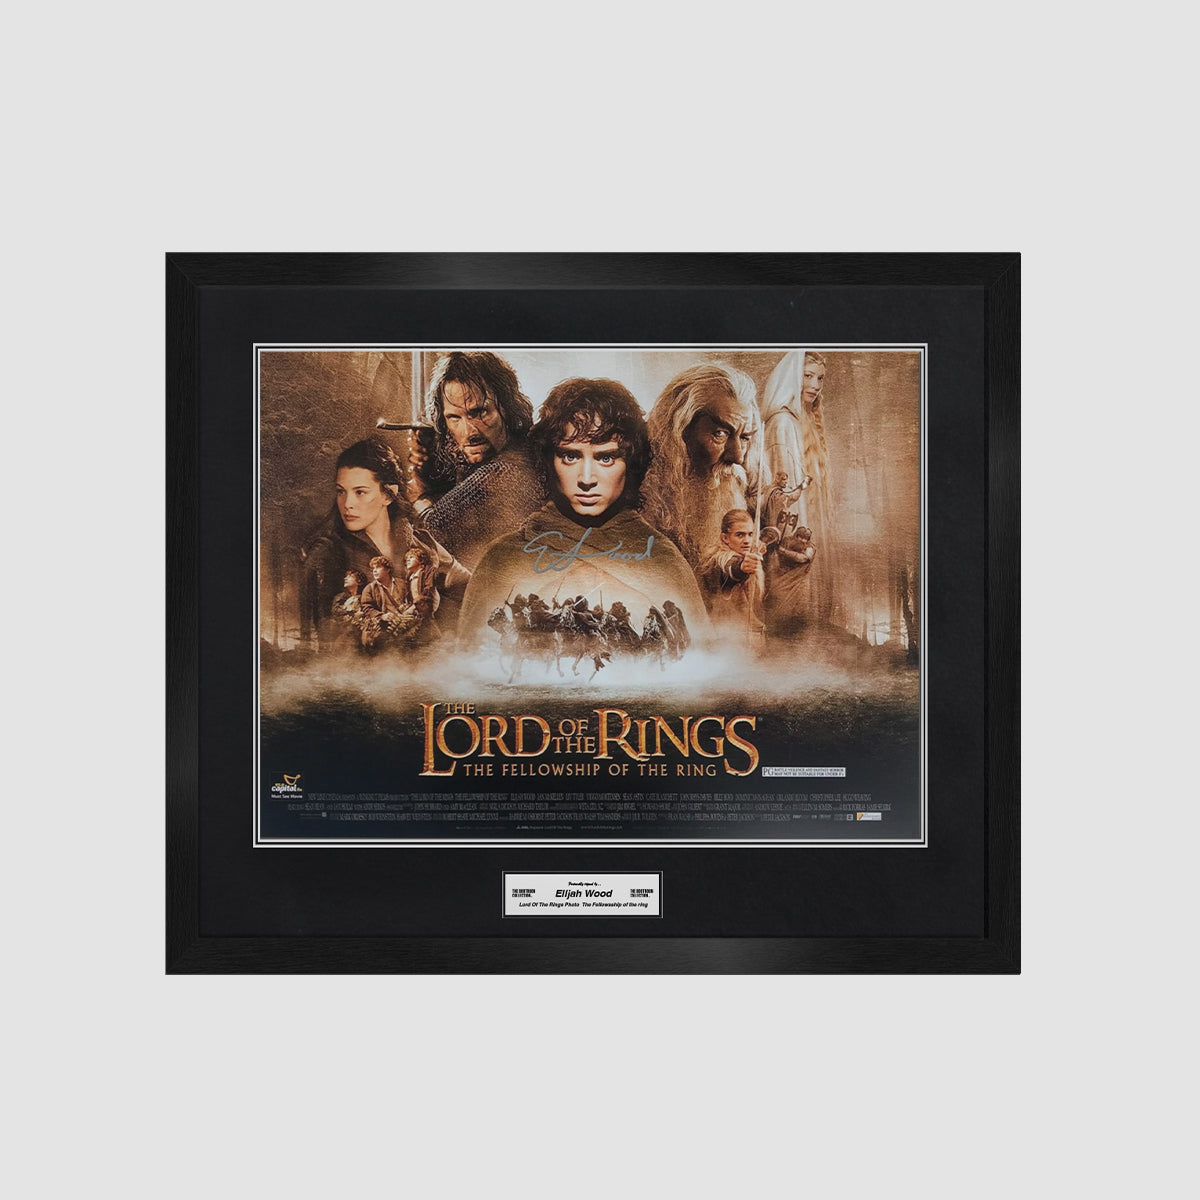 Elijah Wood Signed The Lord Of The Rings Poster - The Fellowship of the Ring